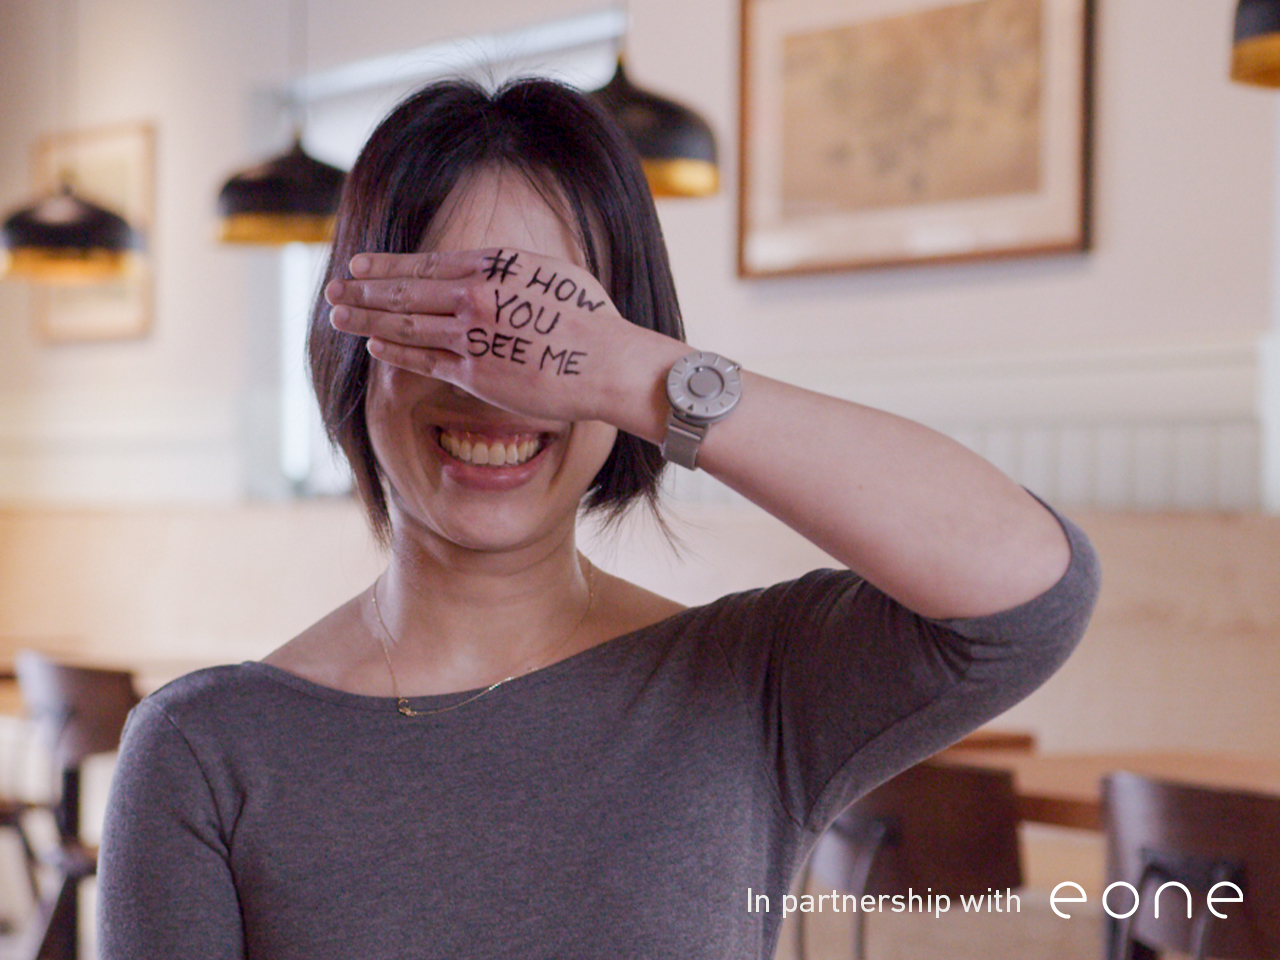 Eone's International Women's Day Campaign Empowers Women to Share their Stories #HowYouSeeMe